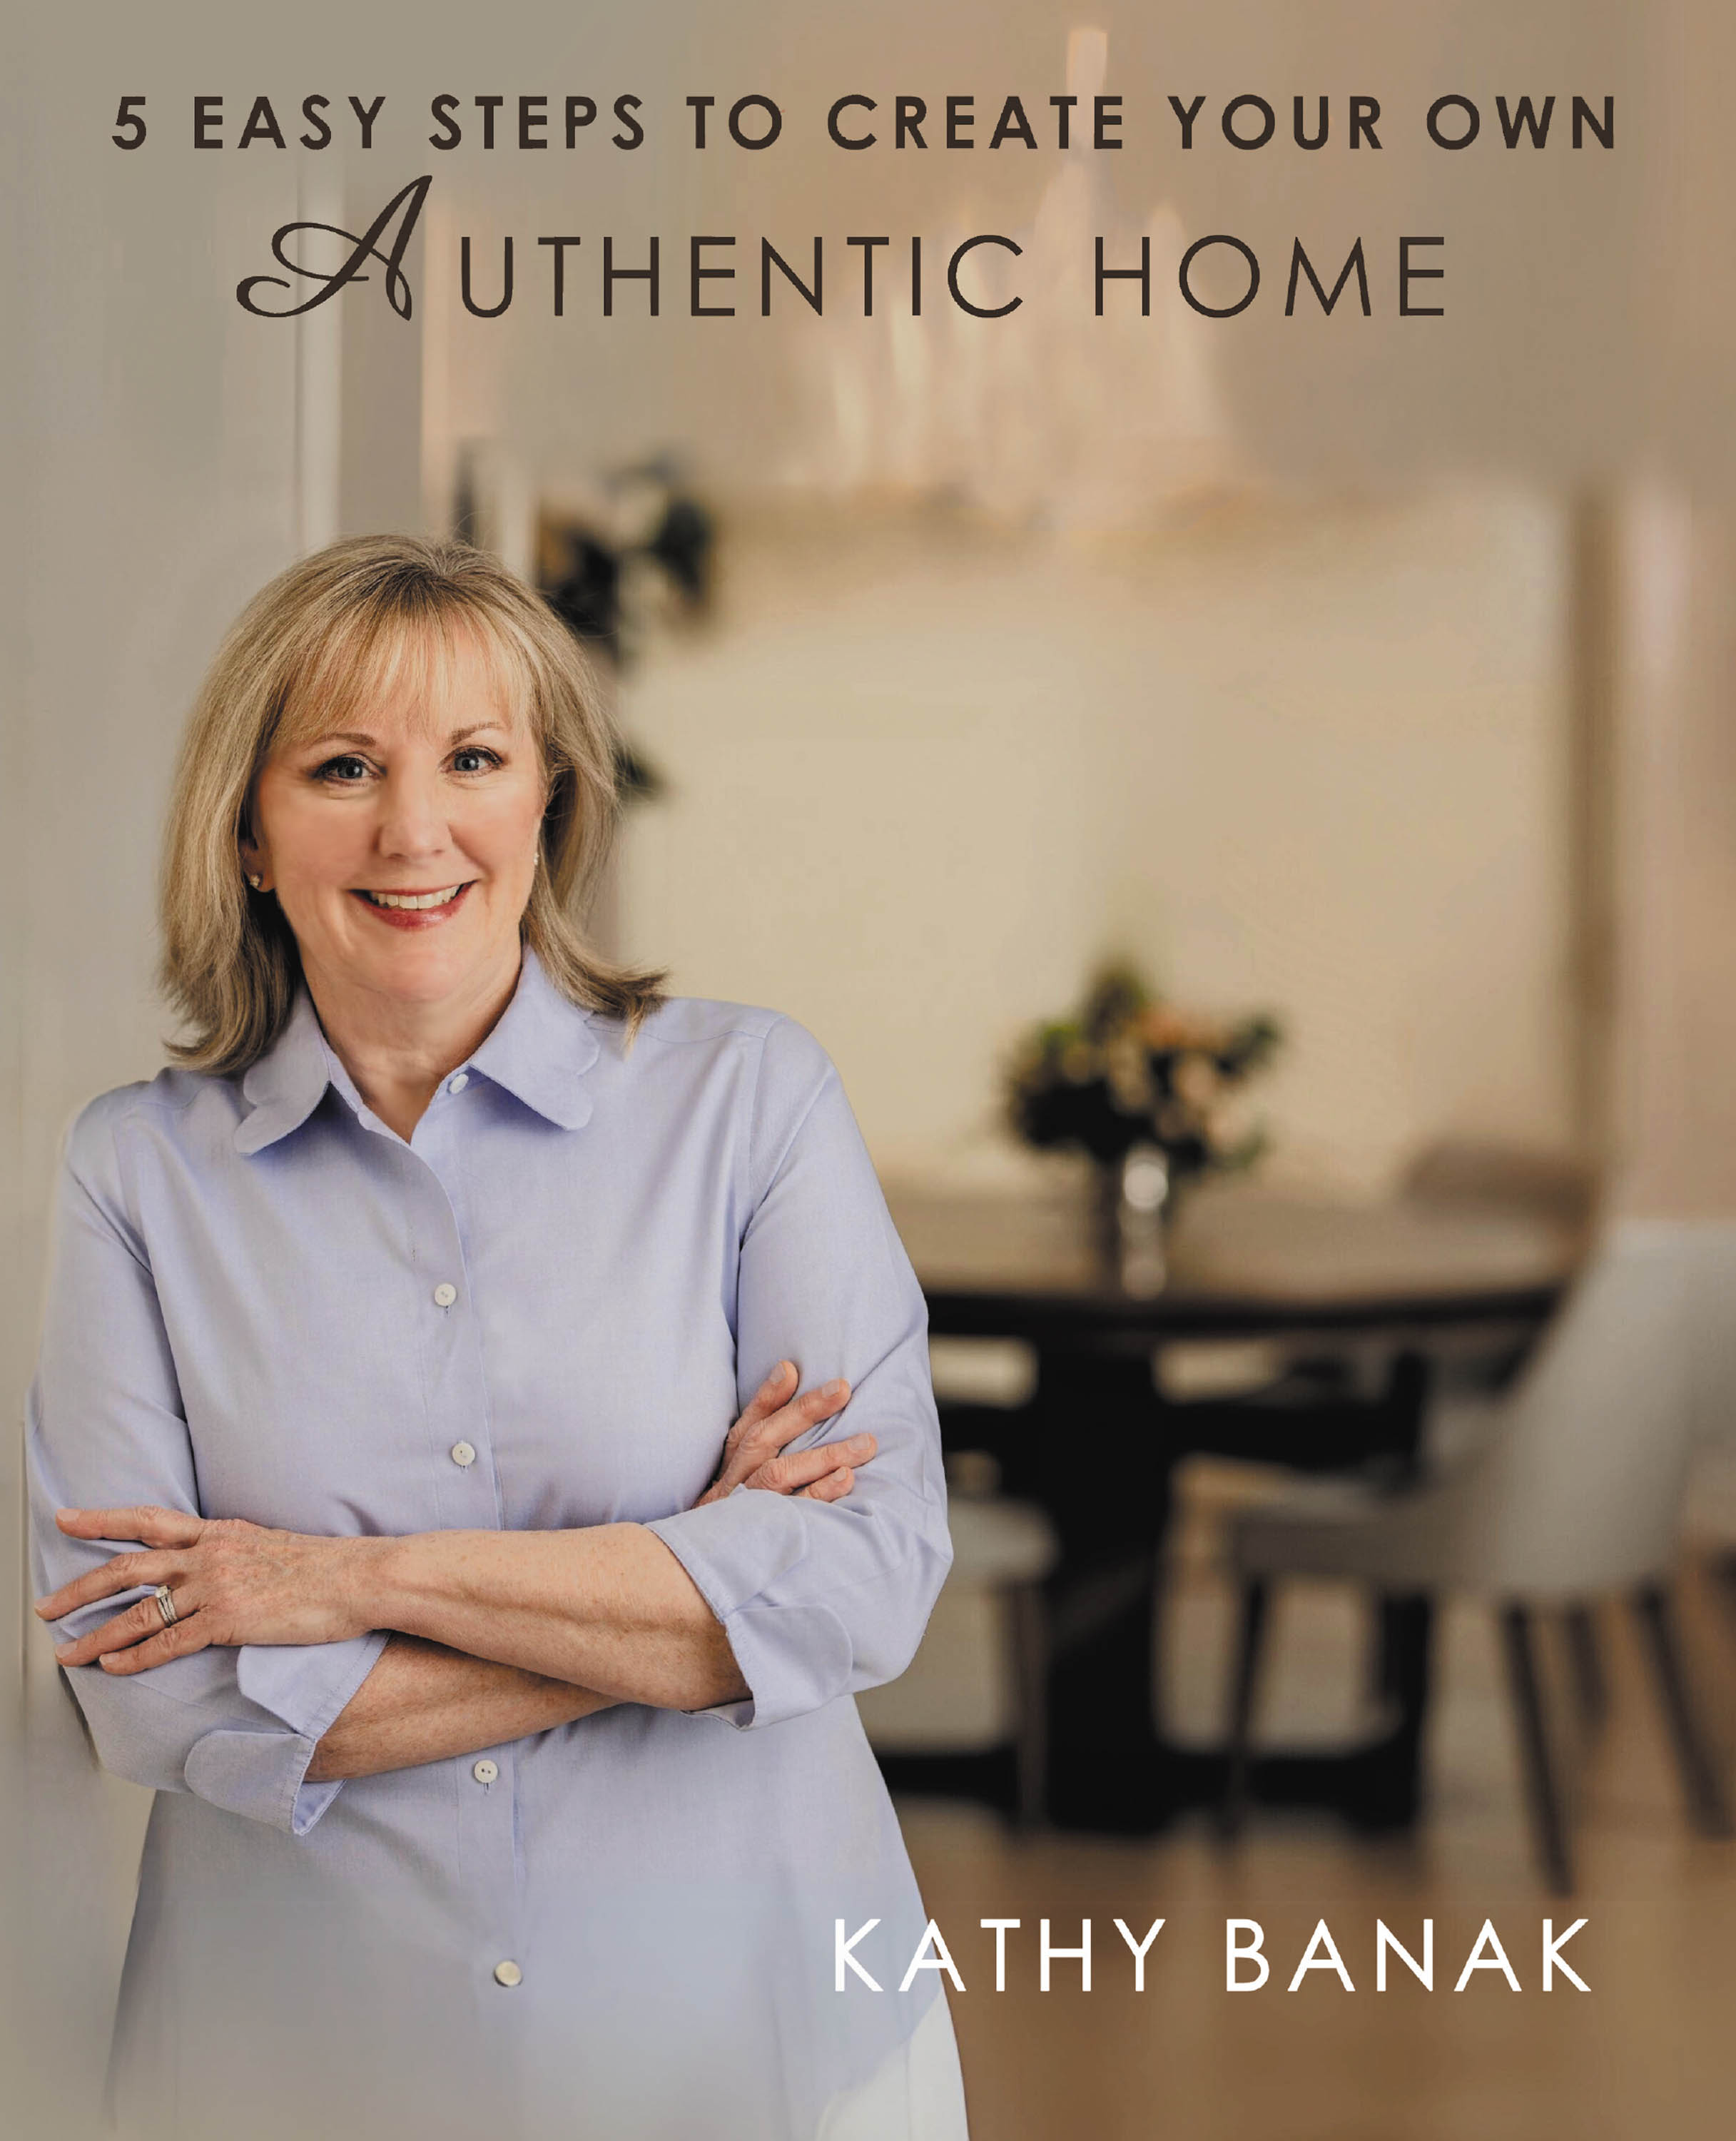 Author Kathy Banak’s New Book, "5 Easy Steps to Create Your Own Authentic Home," is an Insightful Guide to Transforming One’s Living Space Into a Personal Sanctuary